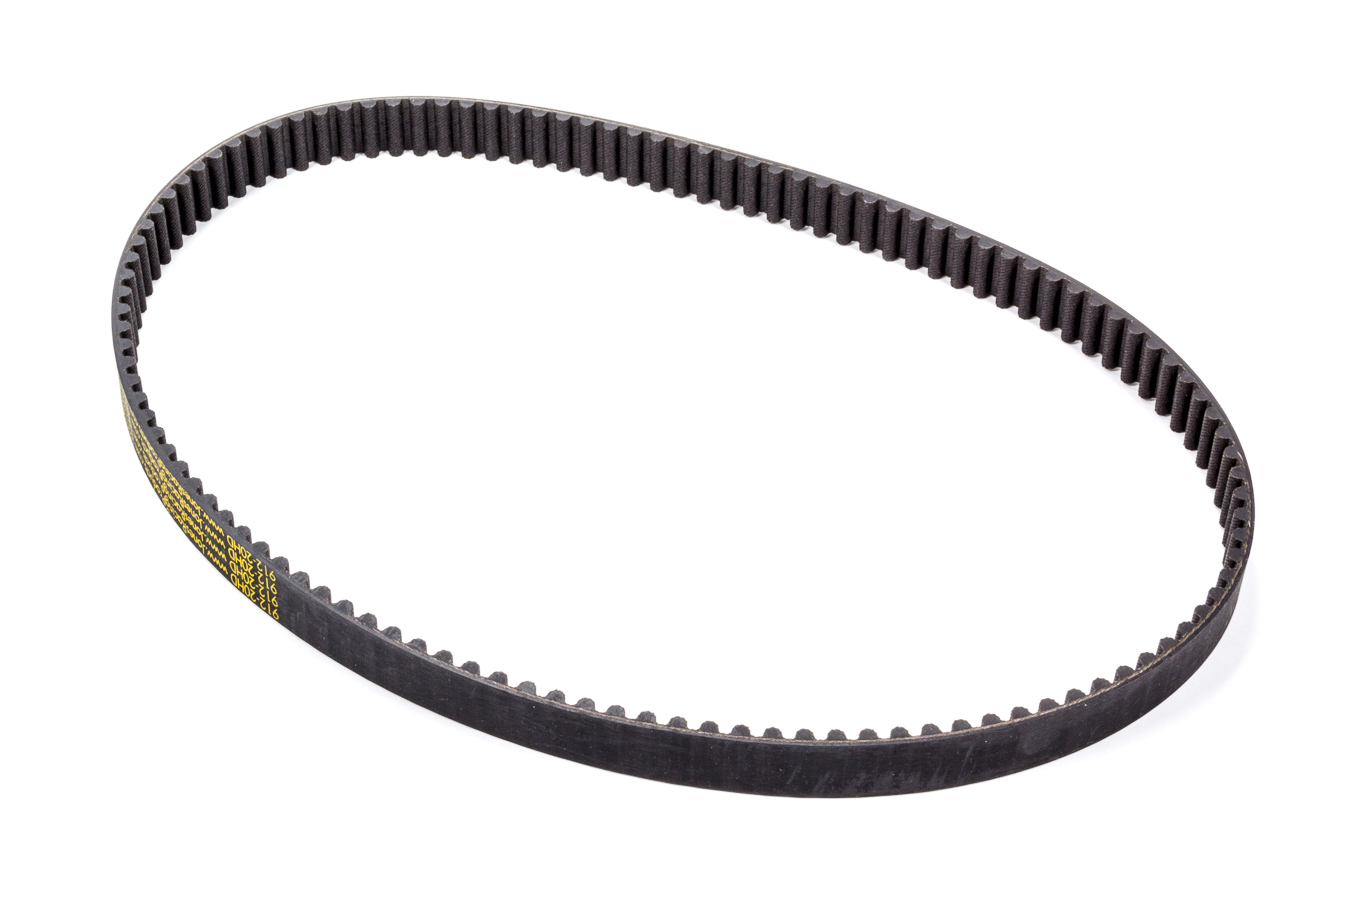 Jones Racing Products 912-20HD HTD Drive Belt, 35.910 in Long, 20 mm Wide, 8 mm Pitch, Each